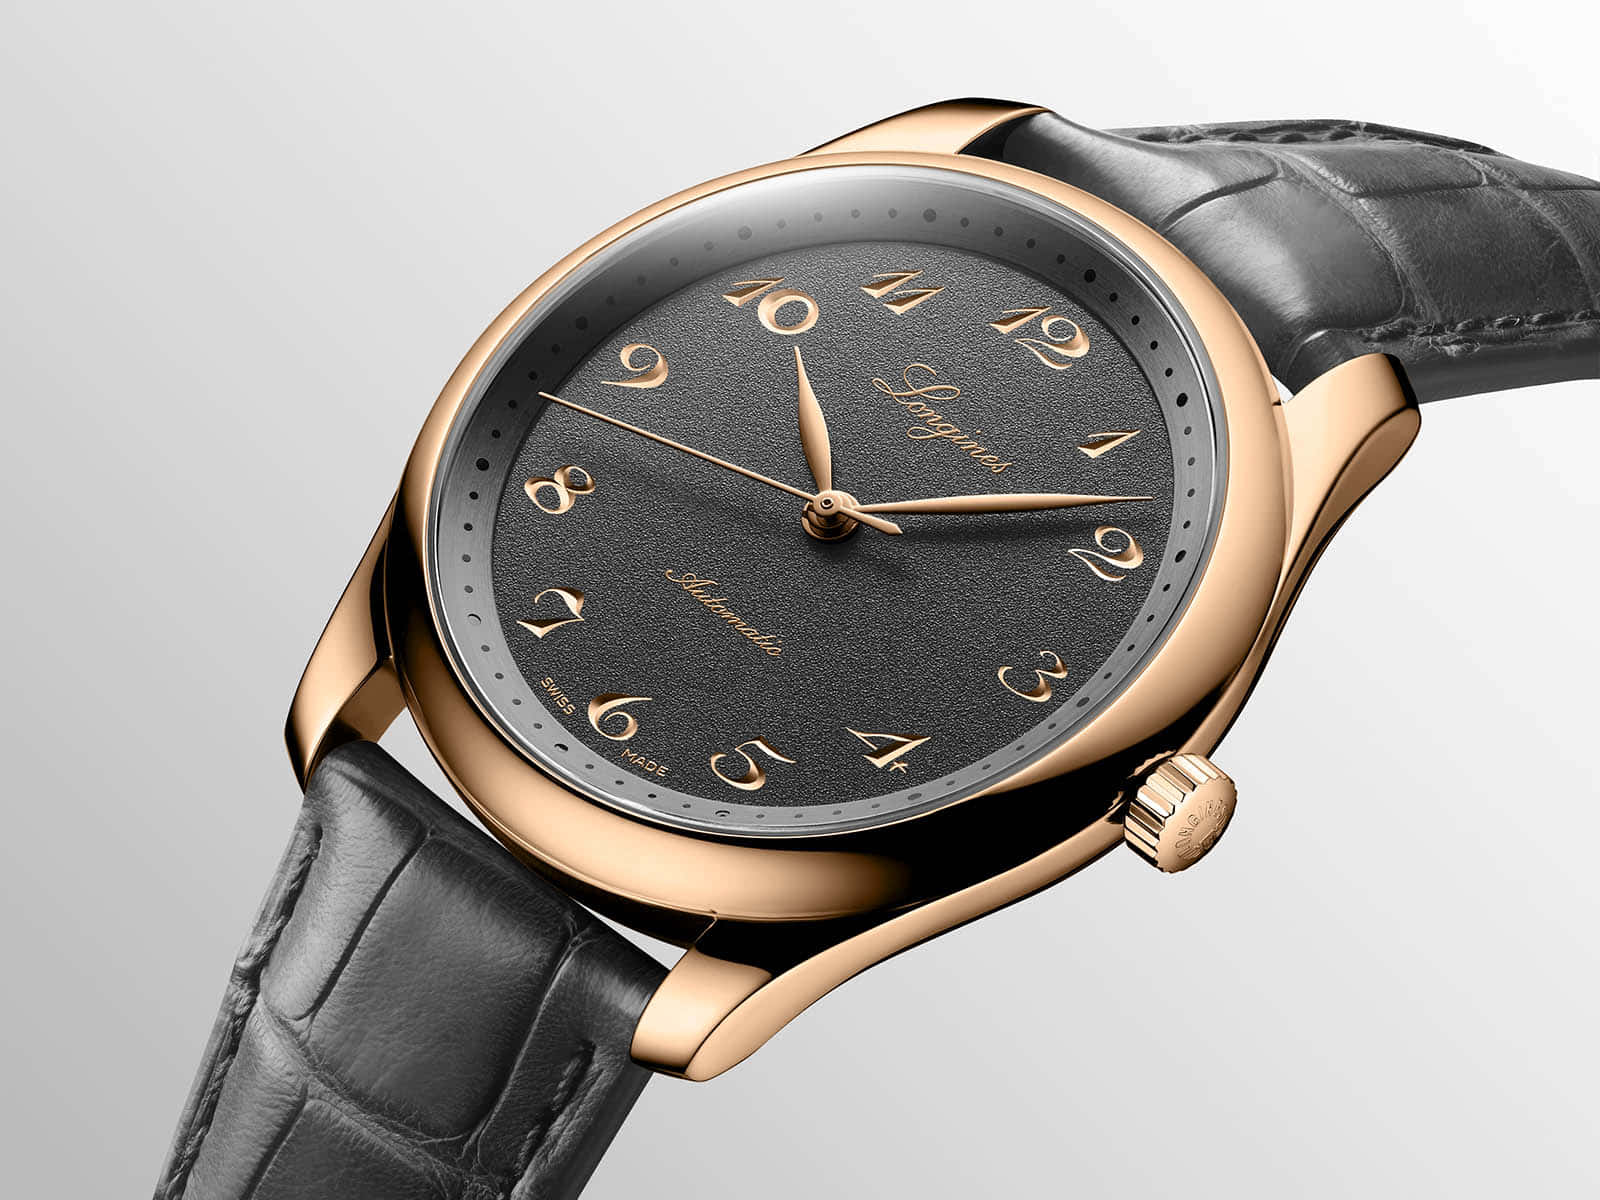 Luxurious Longines Master Watch with Bronze Dial Wallpaper